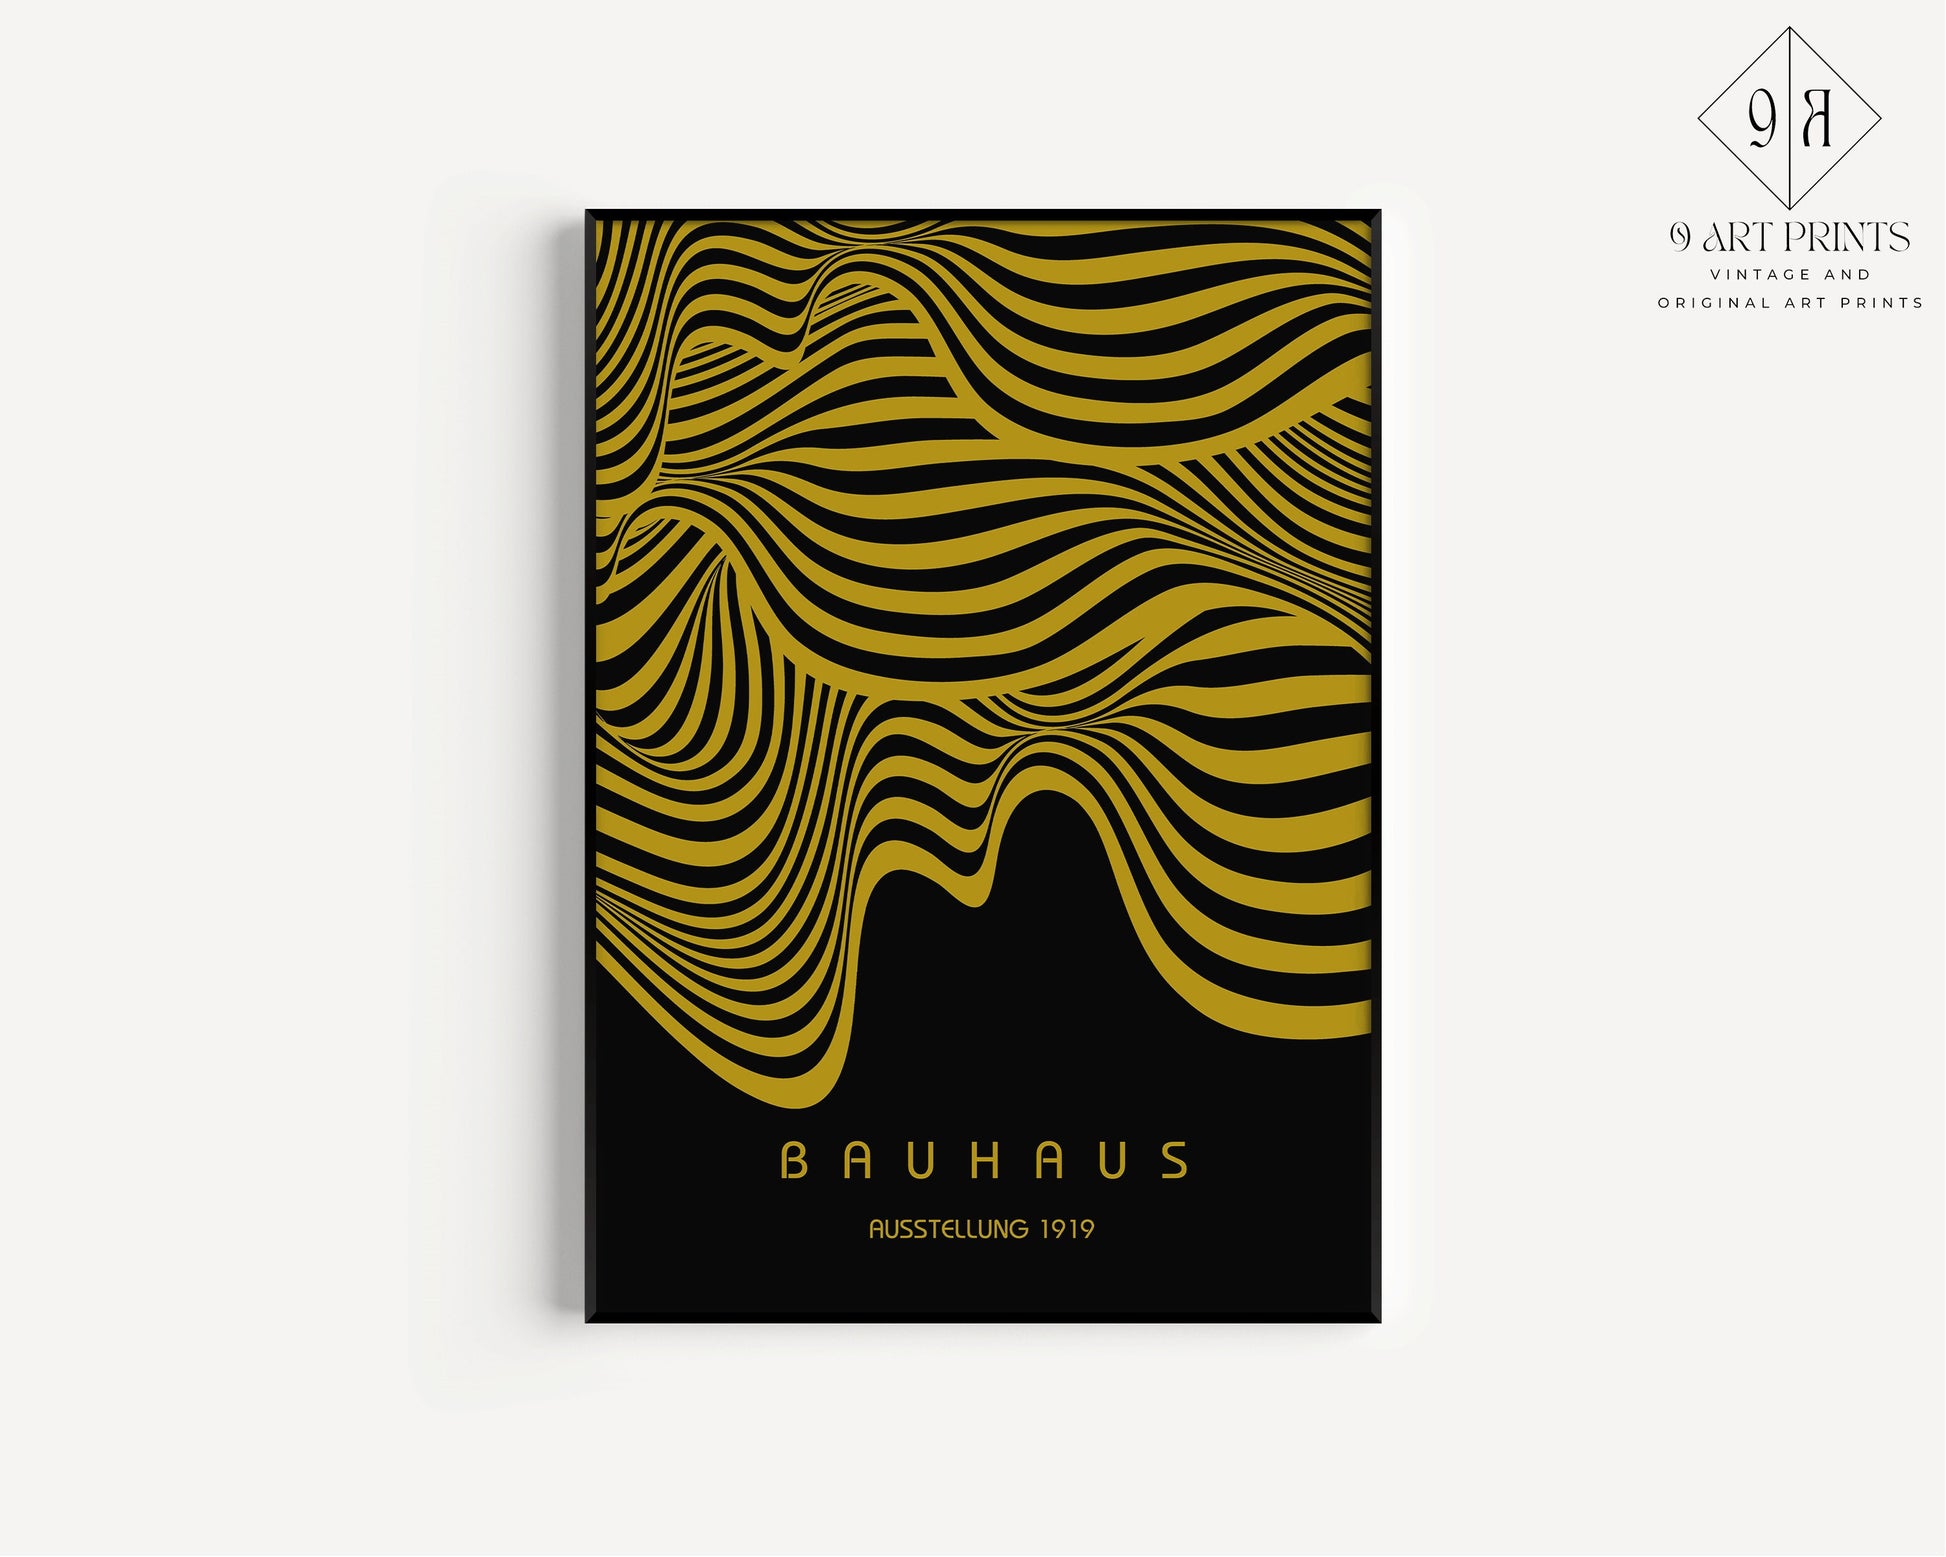 Framed Black and Gold Bauhaus Poster Wavy Lines Mid-Century Modern Art Print Vintage Minimalist Abstract Wall Art Abstract Gift Idea